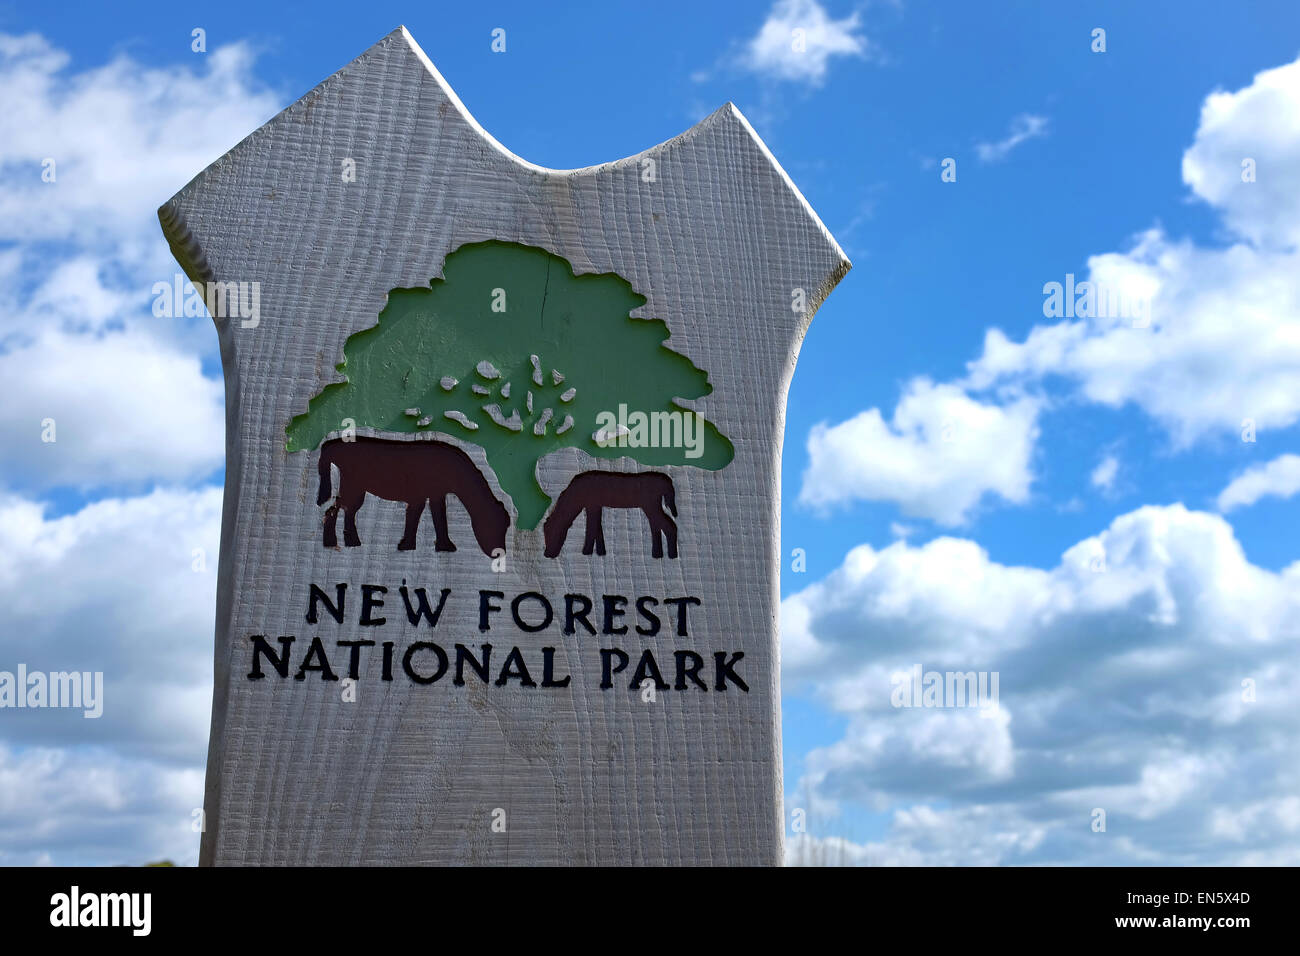 New Forest National Park sign against a blue cloudy sky Stock Photo